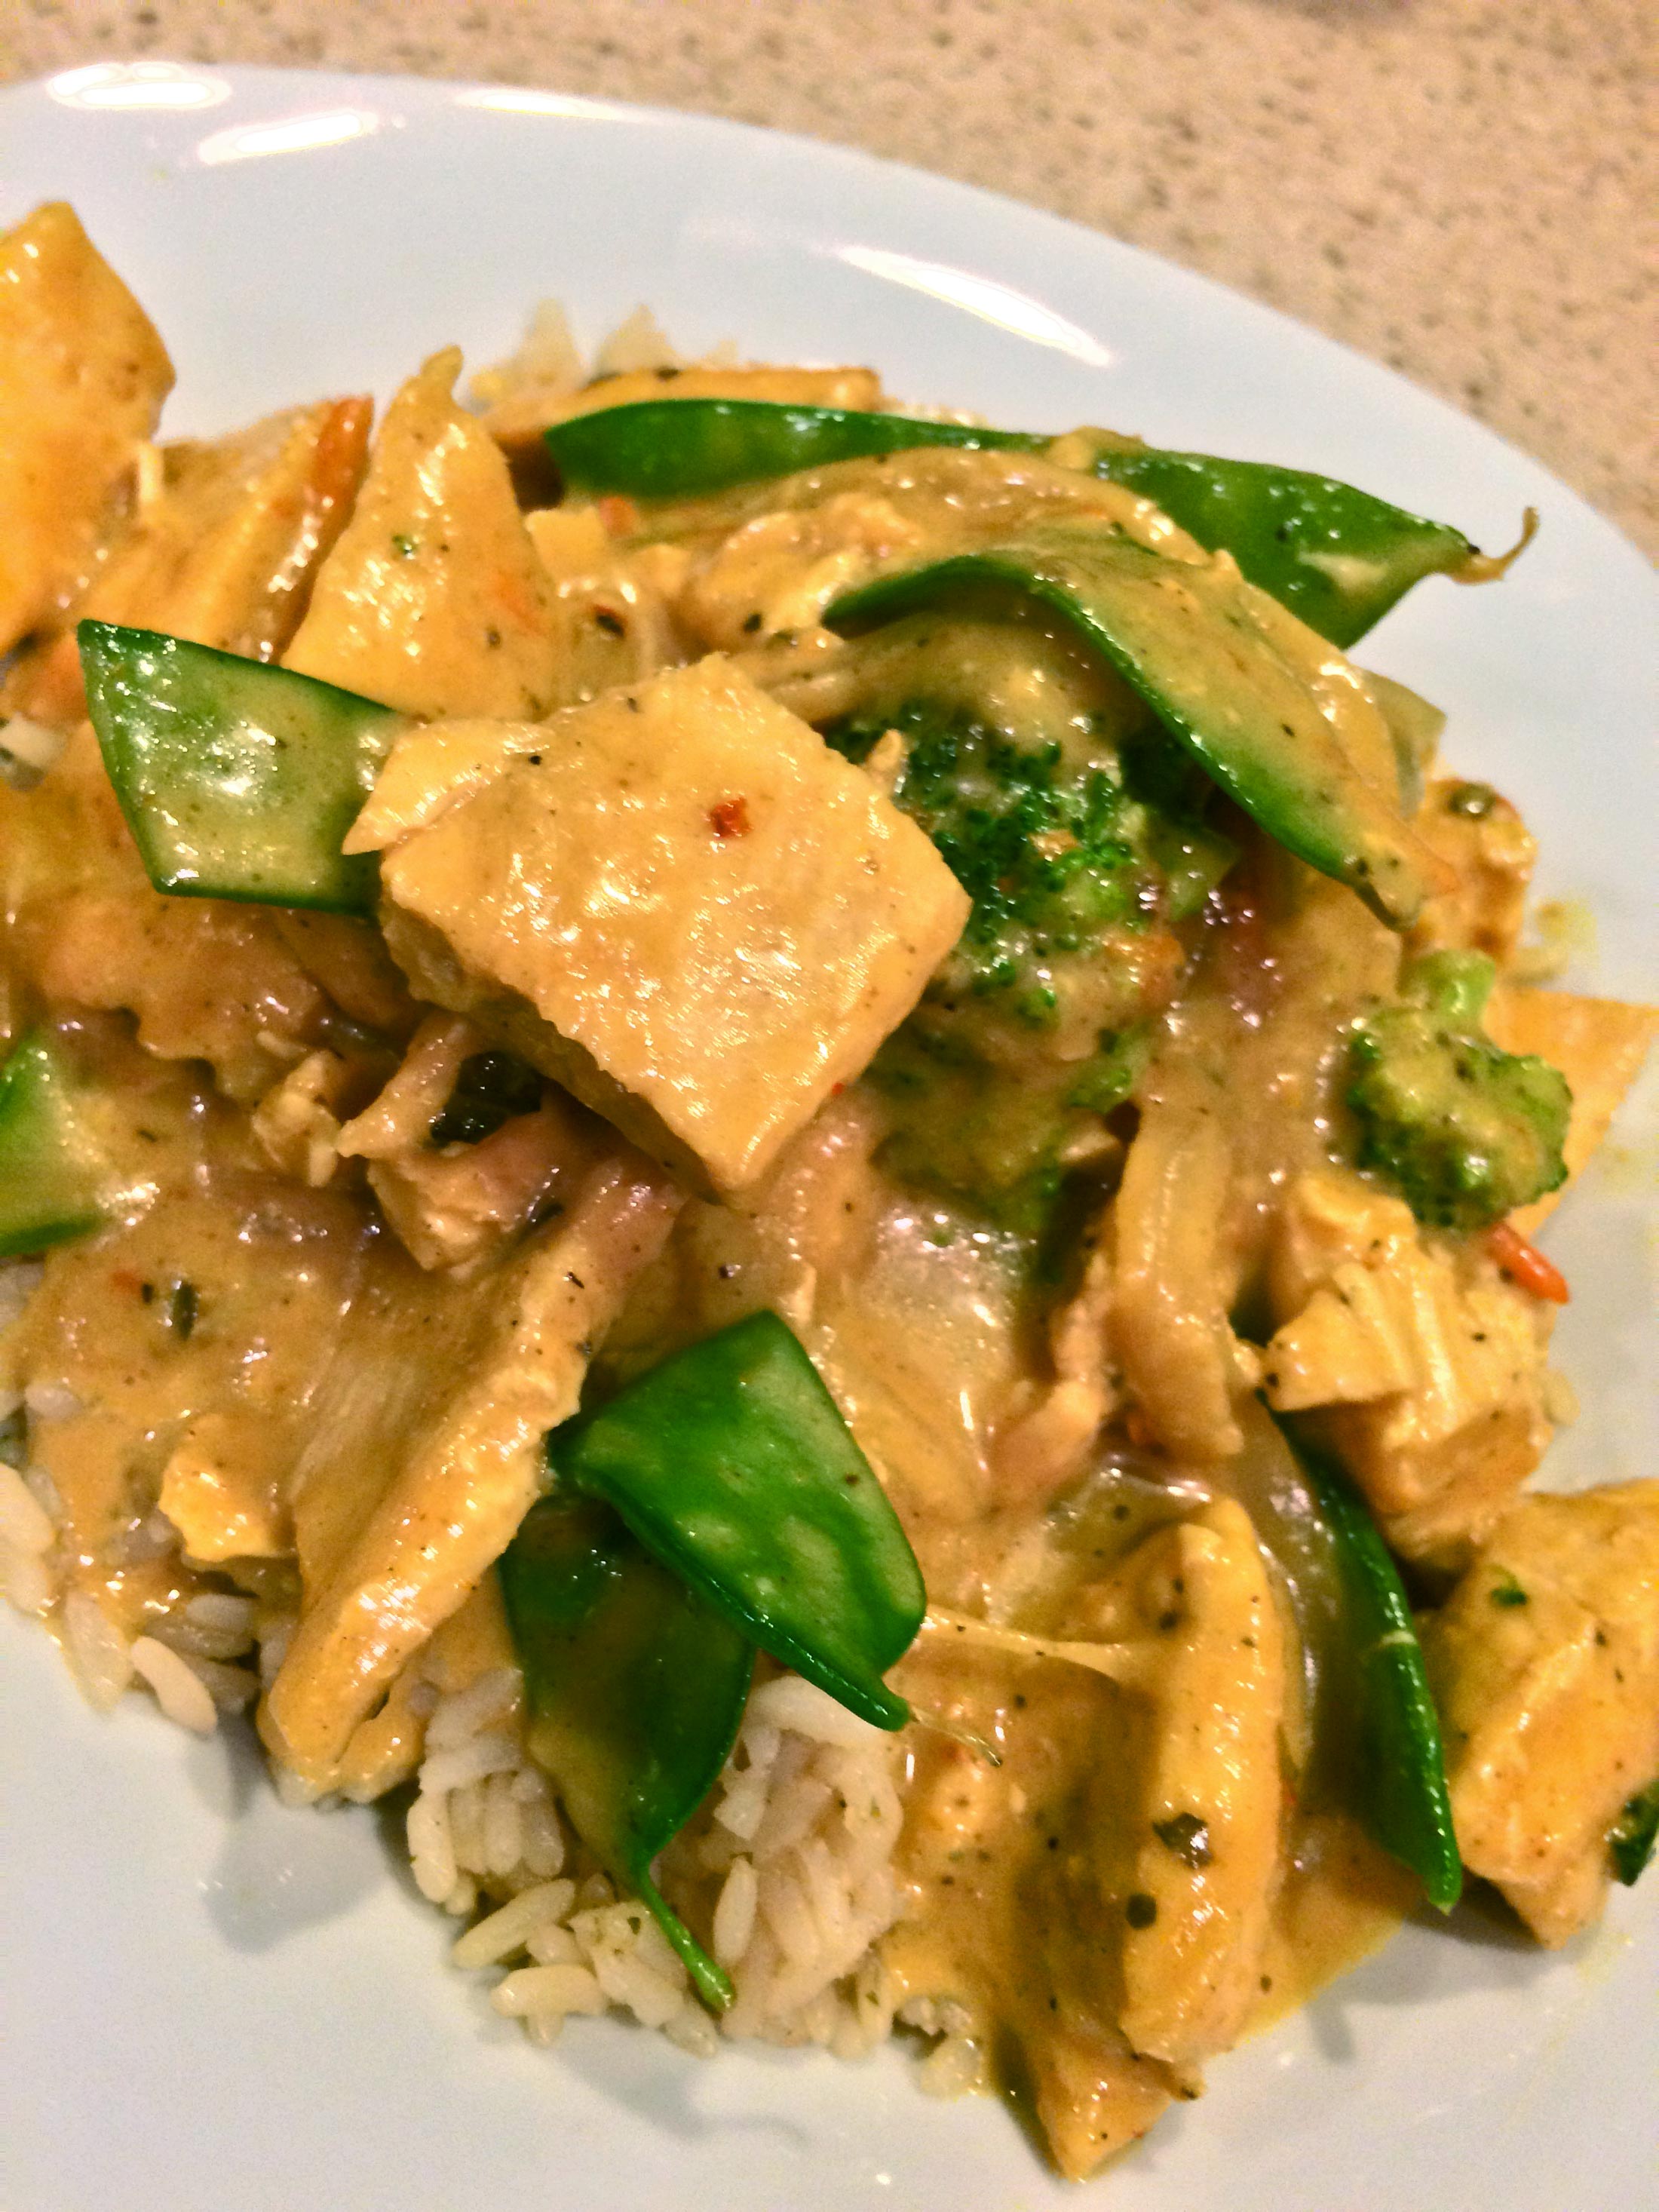 Pair of Foodies Image of Thai Coconut Chicken The Fresh Market Meal Kit